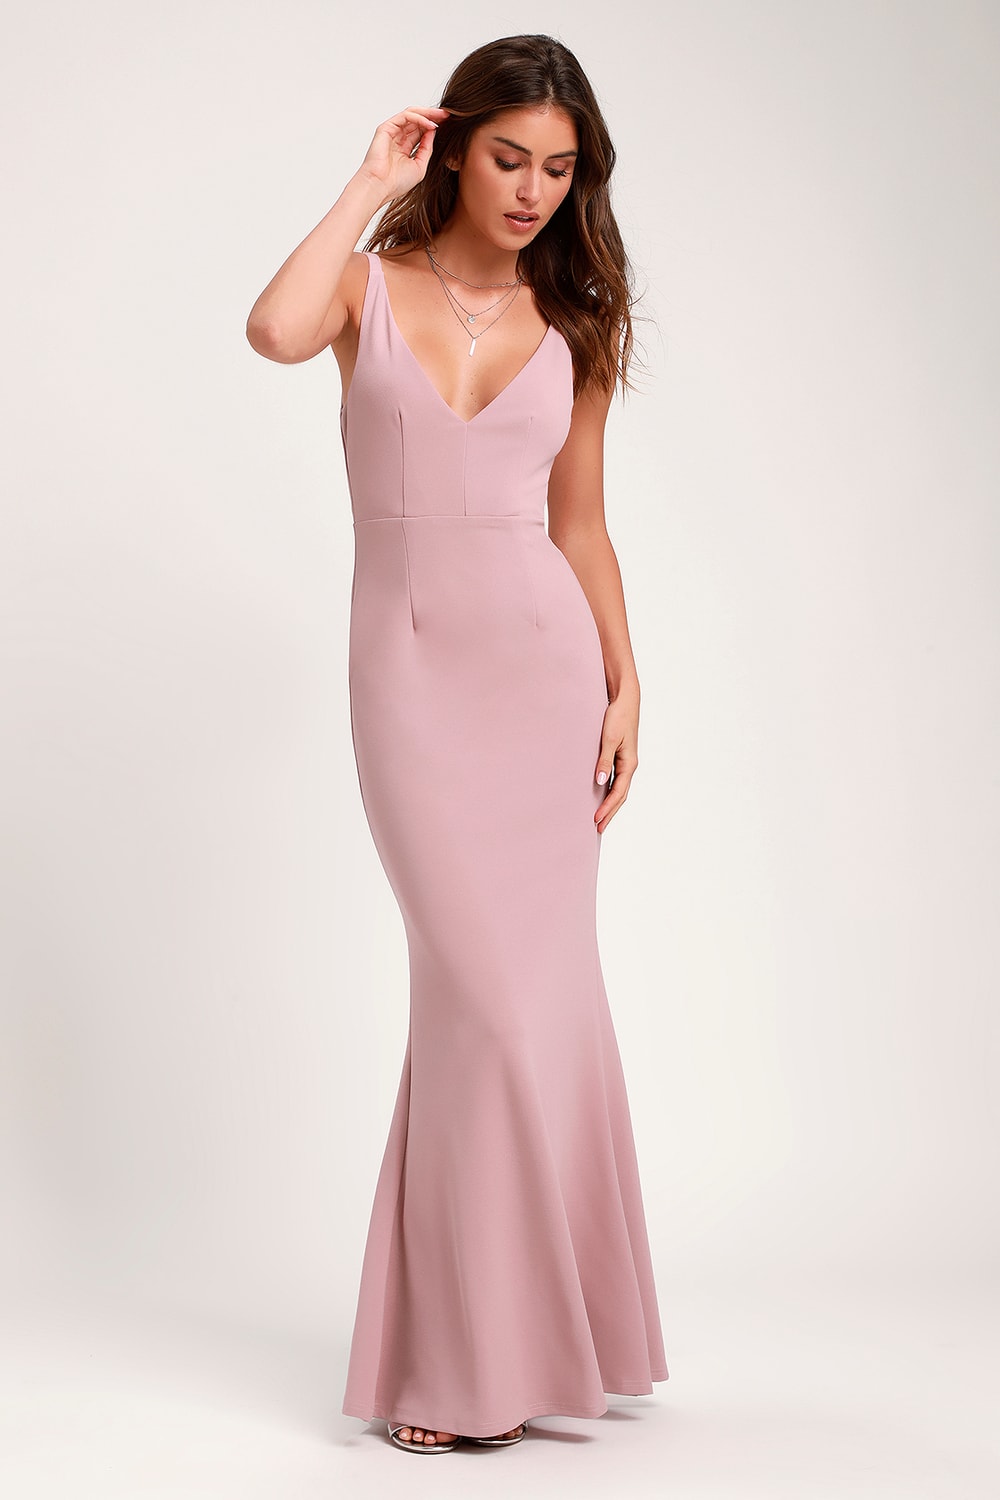 help me find this bridesmaid dress and color! 2